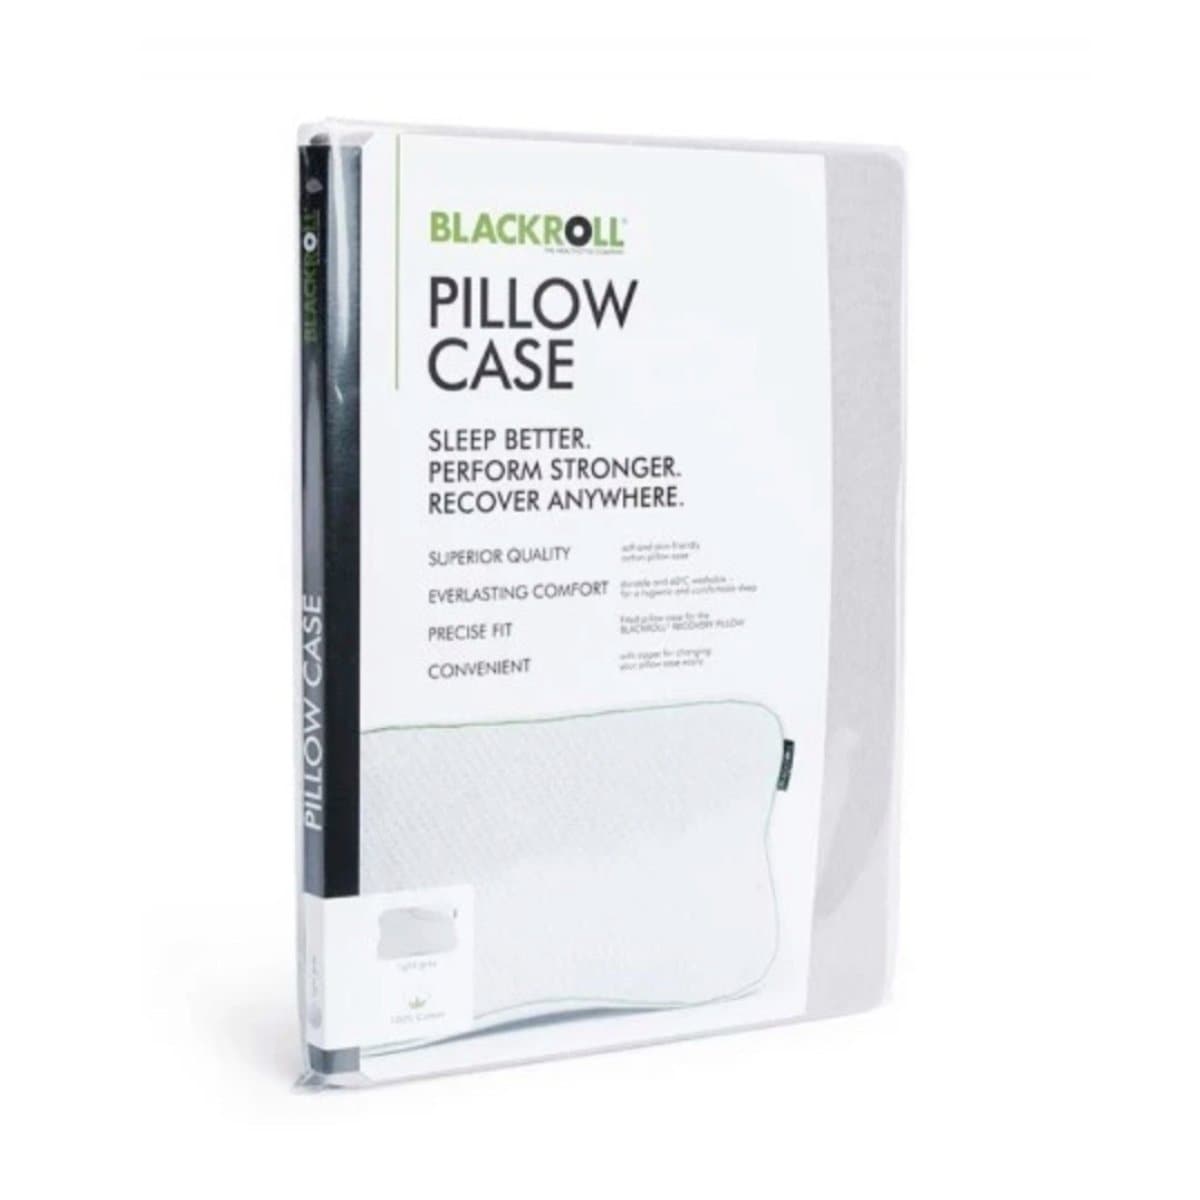 BLACKROLL Pillow CASE for Recovery Pillow, Jersey, Grey